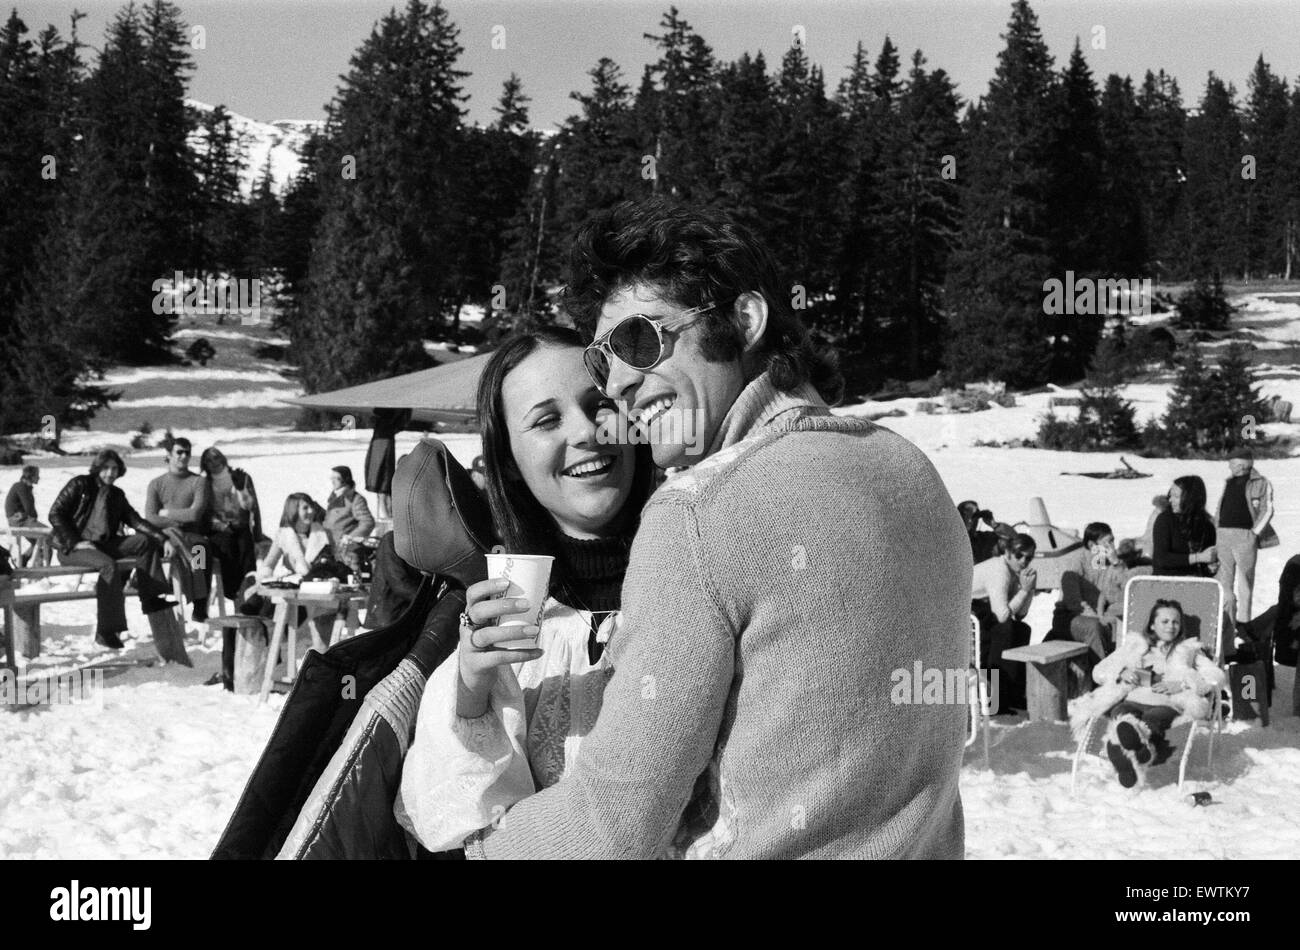 Formula One motor racing driver Francois Cevert enjoys some time off with a girl friend at a ski resort in Villars Sur Ollan near Montreux, Switzerland. March 1973. Stock Photo